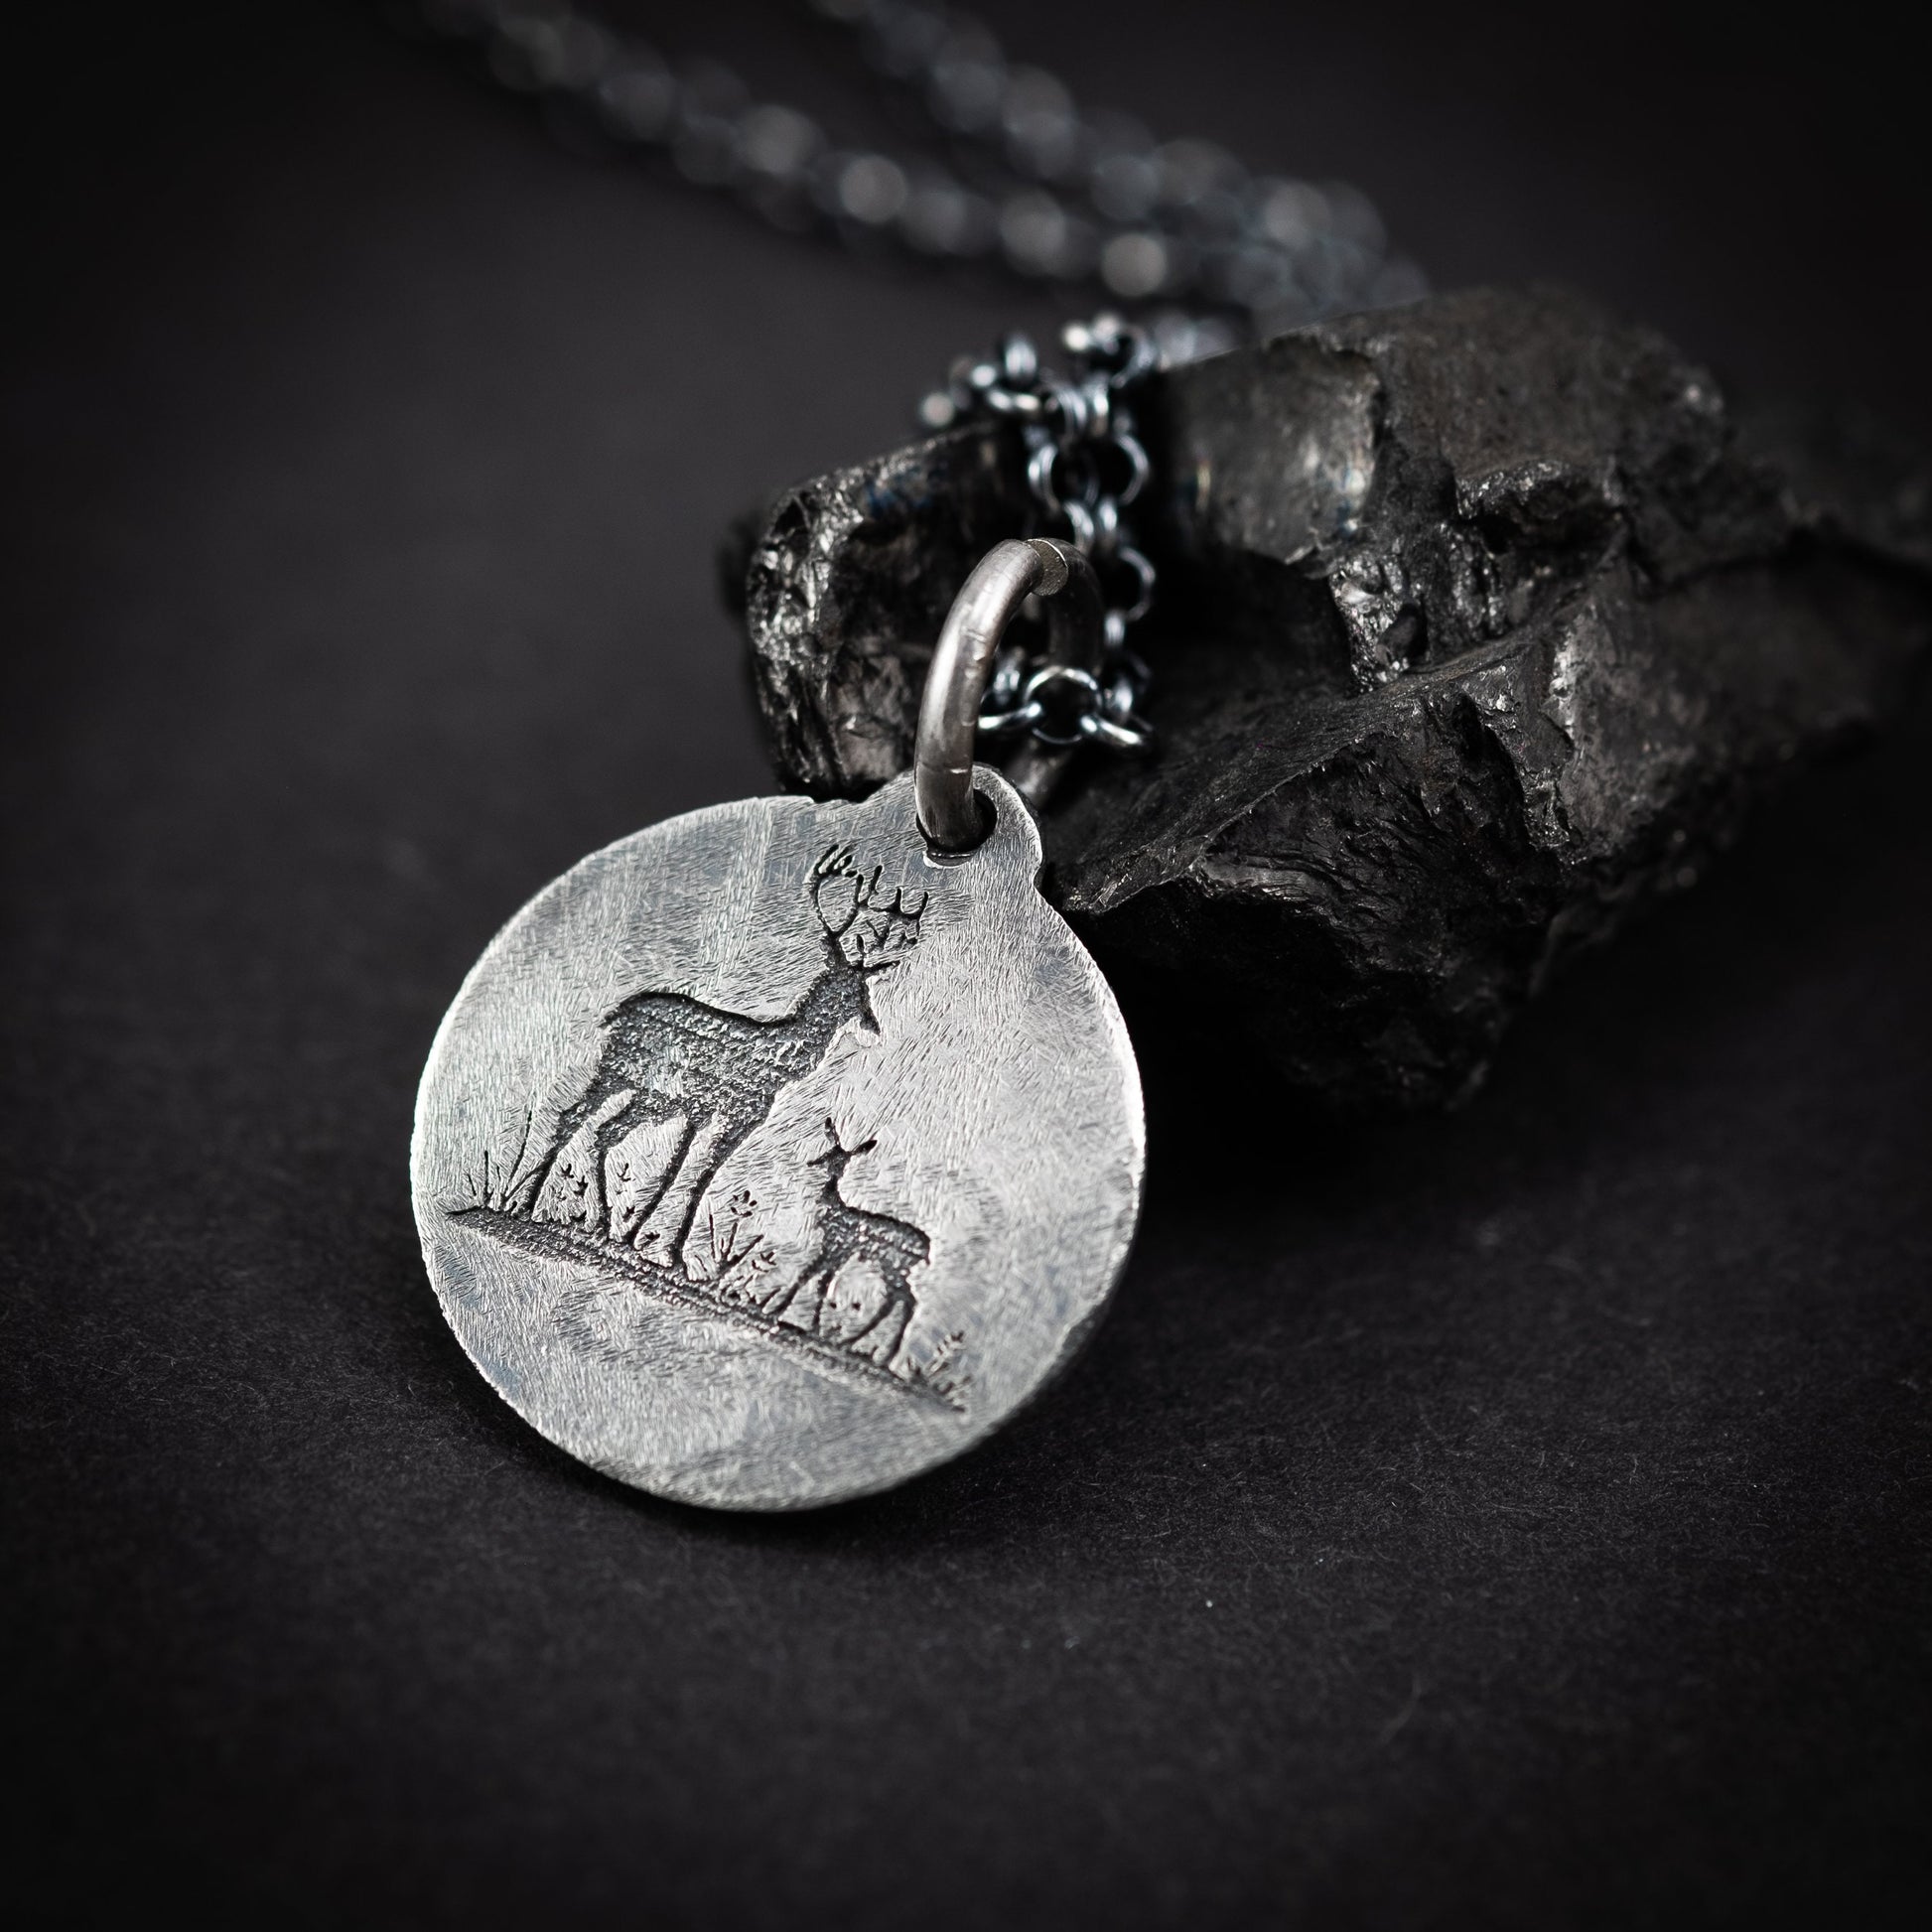 Deer Silver animal pendant necklace, Personalized forest nature jewelry, Christmas gifts, engraved necklace, gift for her, mens necklace